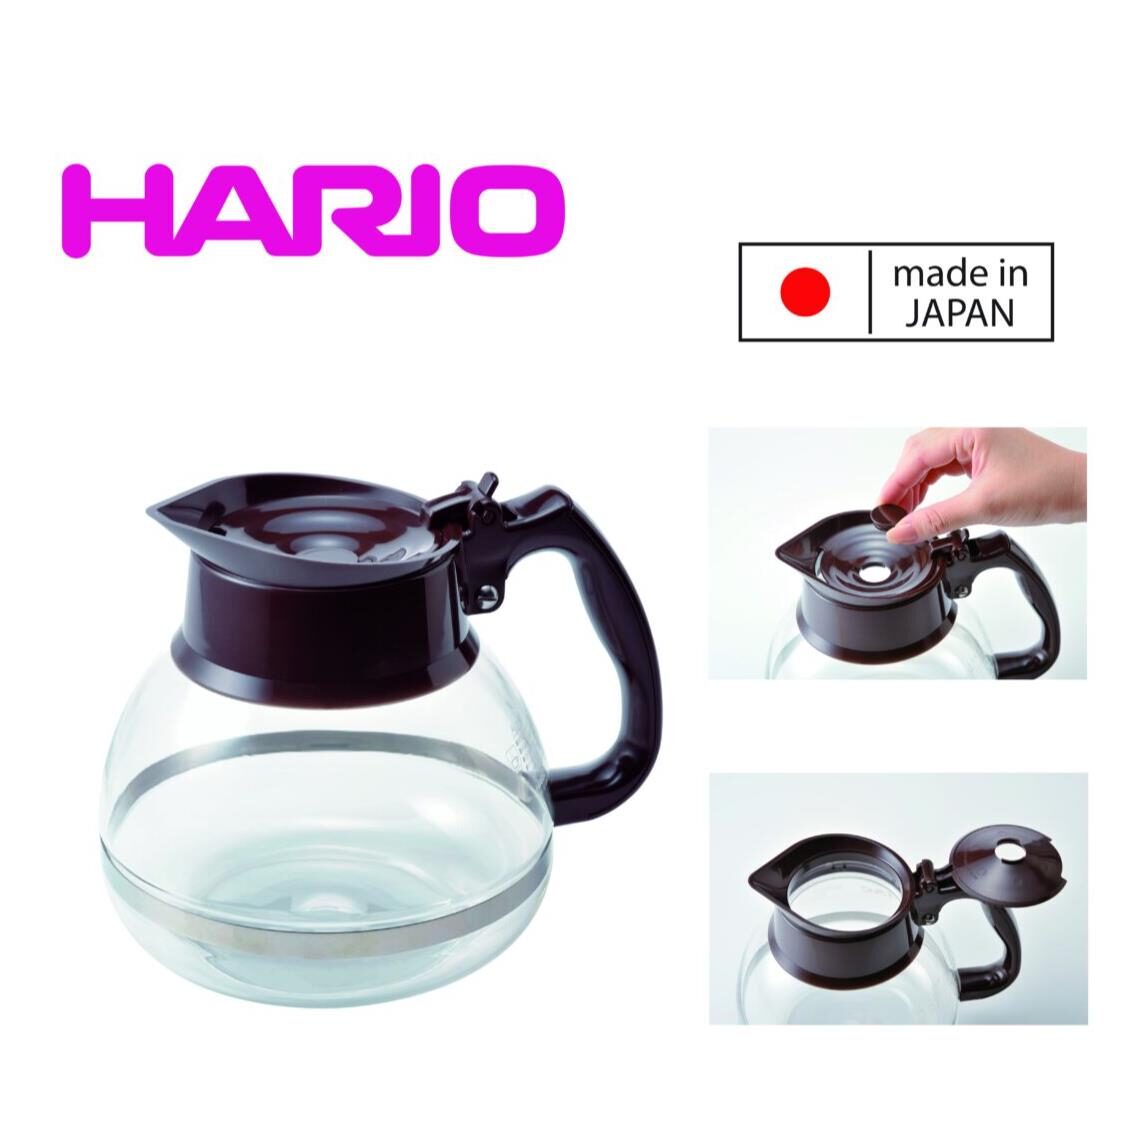 Hario 18L Coffee Decanter Made In Japan CDH-18